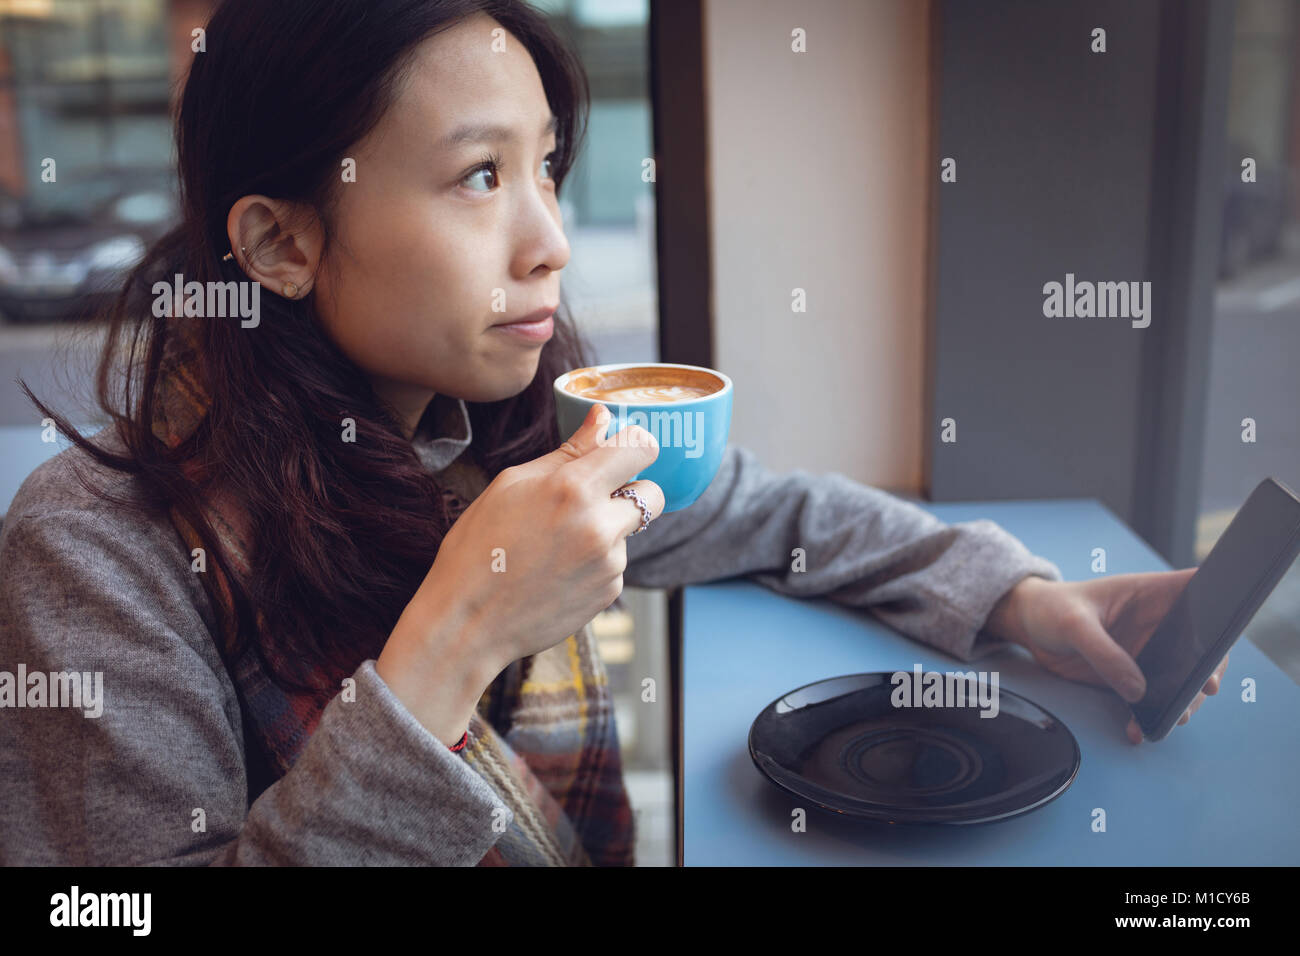 Thoughtful woman having coffee at table Stock Photo